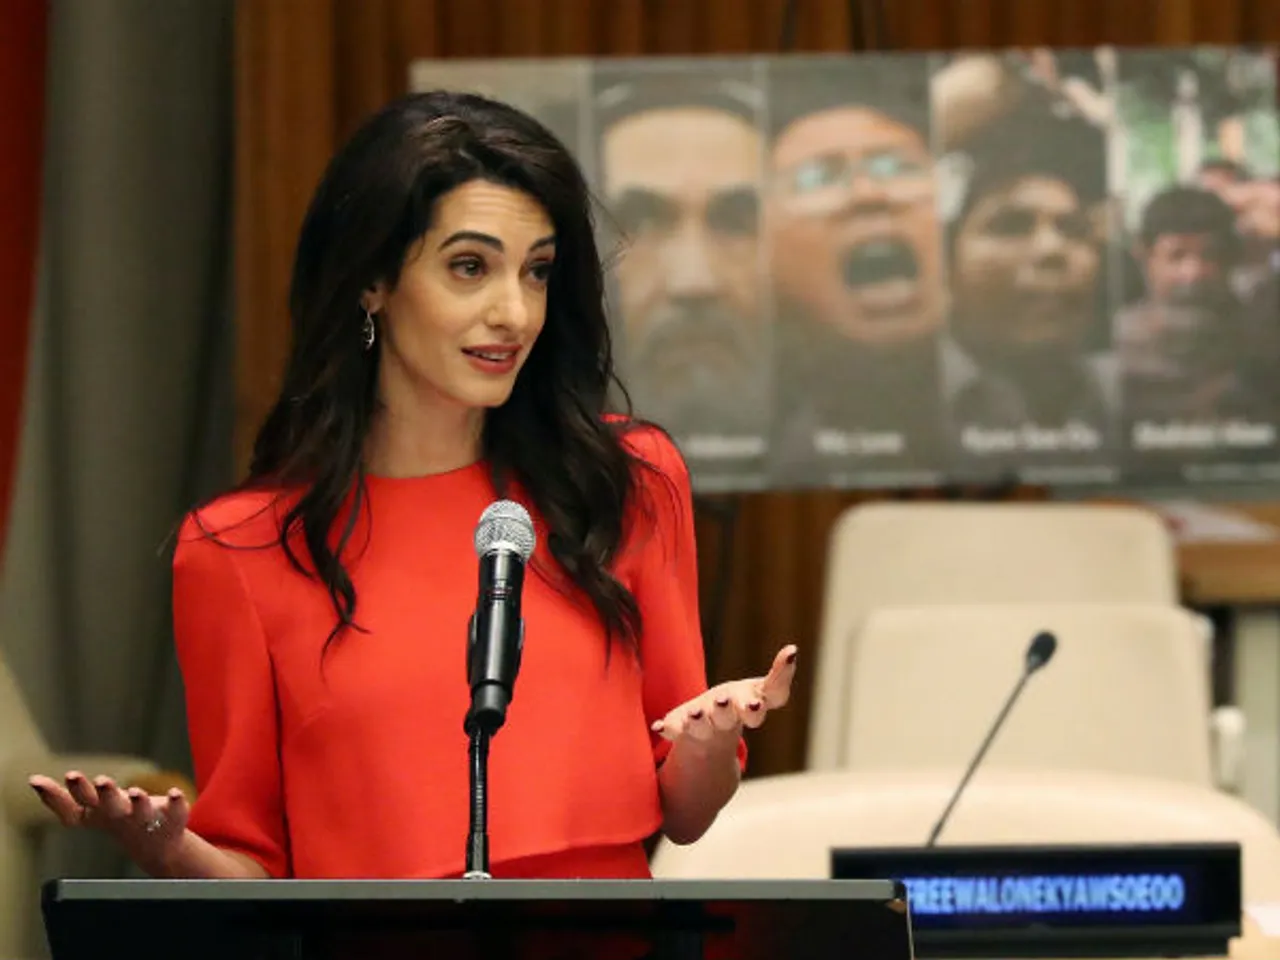 Amal Clooney Quits As UK Special Envoy Over Brexit-Related Legislation